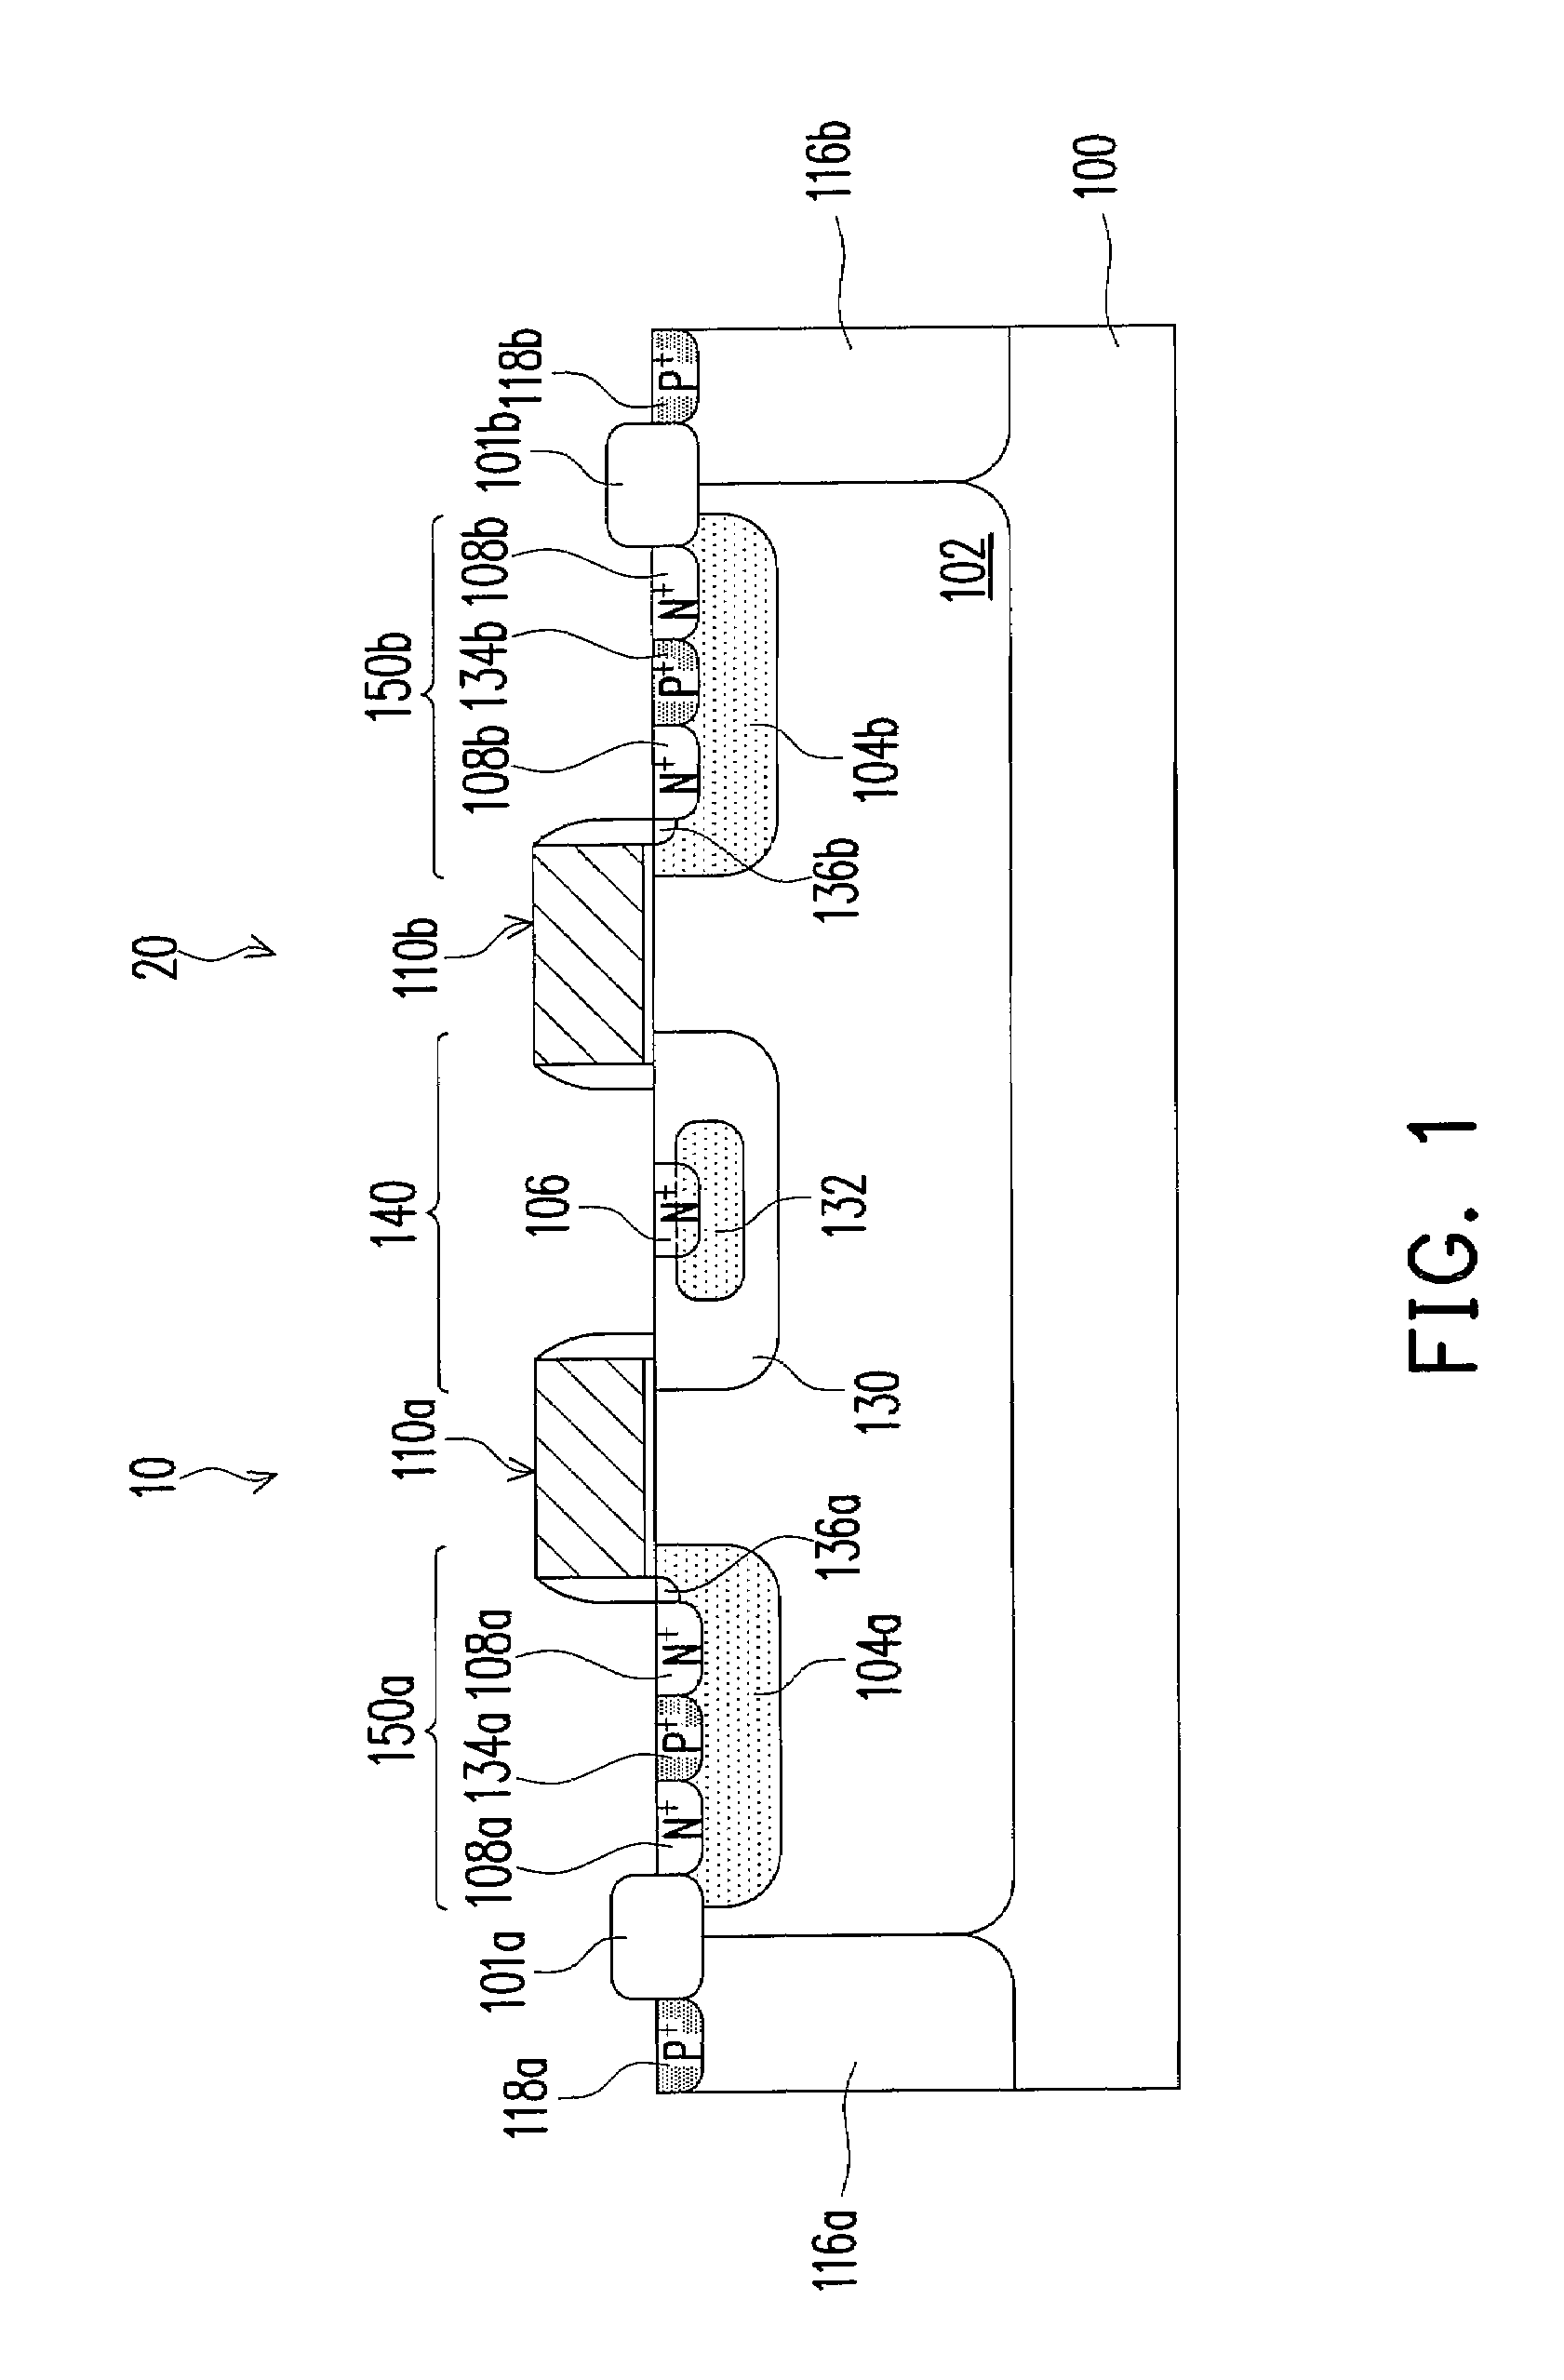 Device for ESD protection circuit